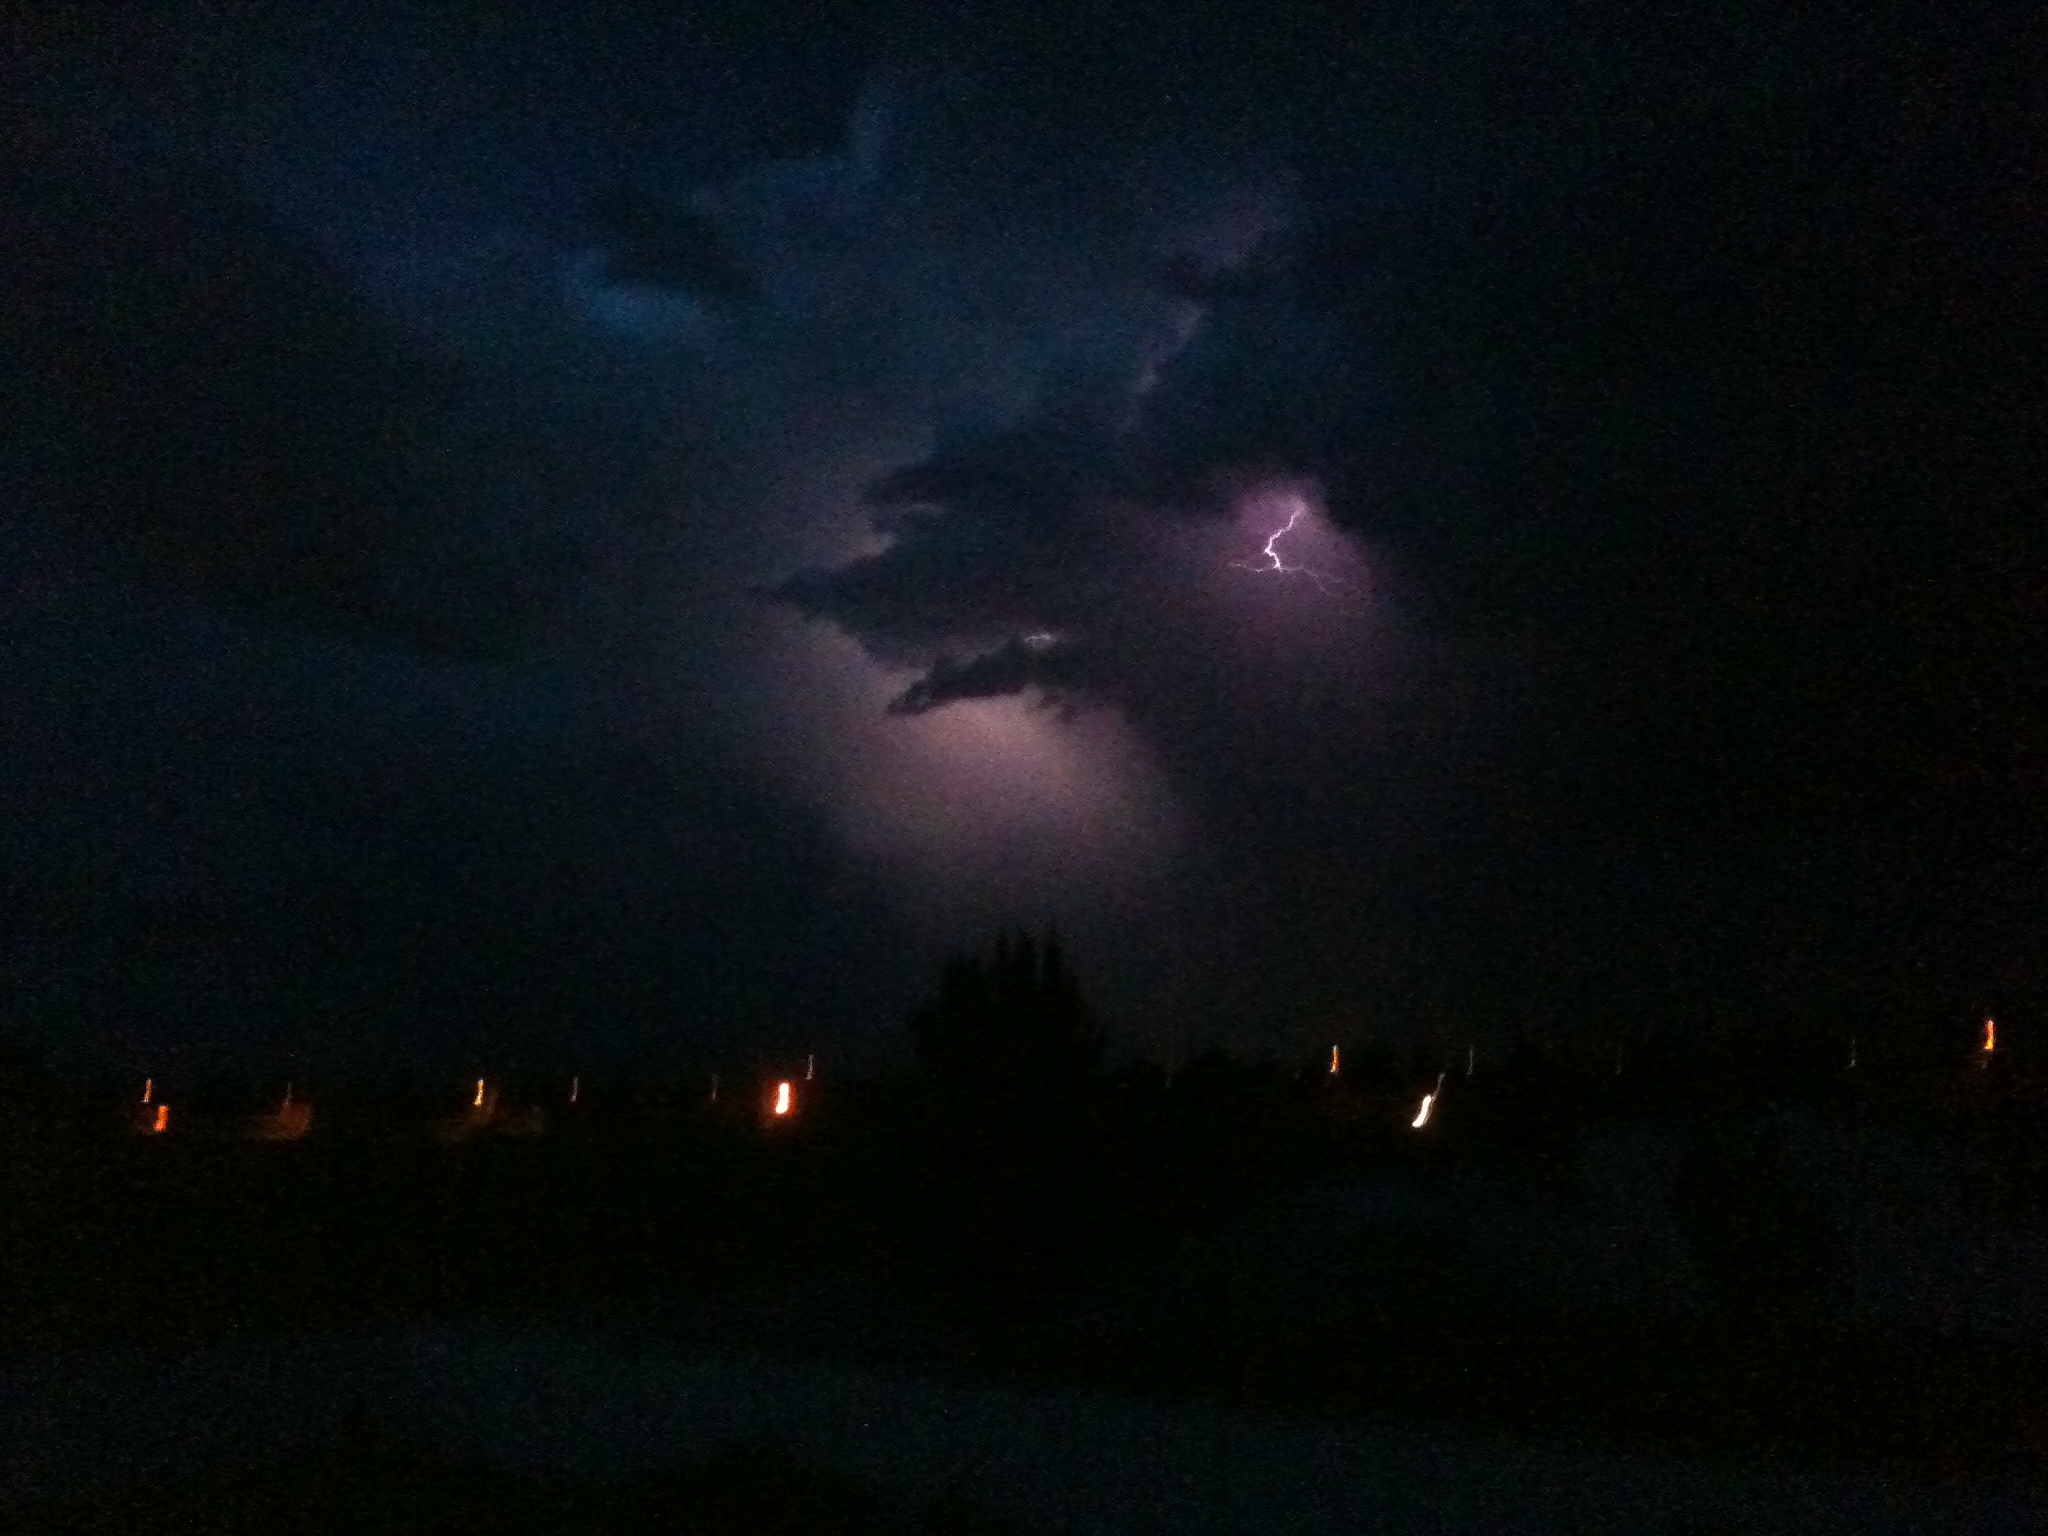 From a Friend back home... weather in Boise is rough tonight!